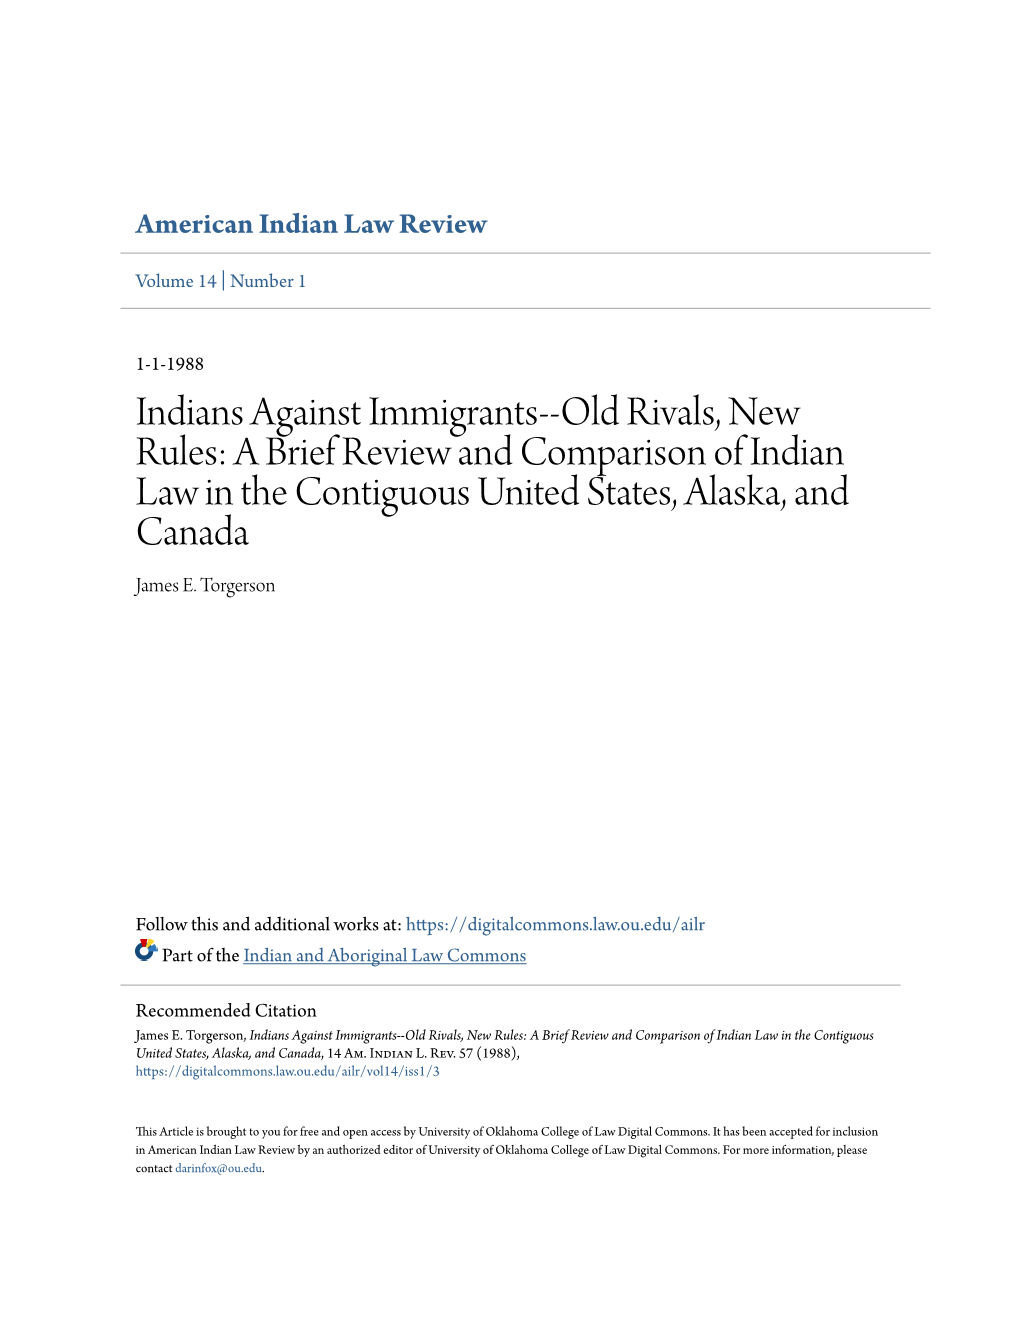 Indians Against Immigrants--Old Rivals, New Rules: a Brief Review and Comparison of Indian Law in the Contiguous United States, Alaska, and Canada James E